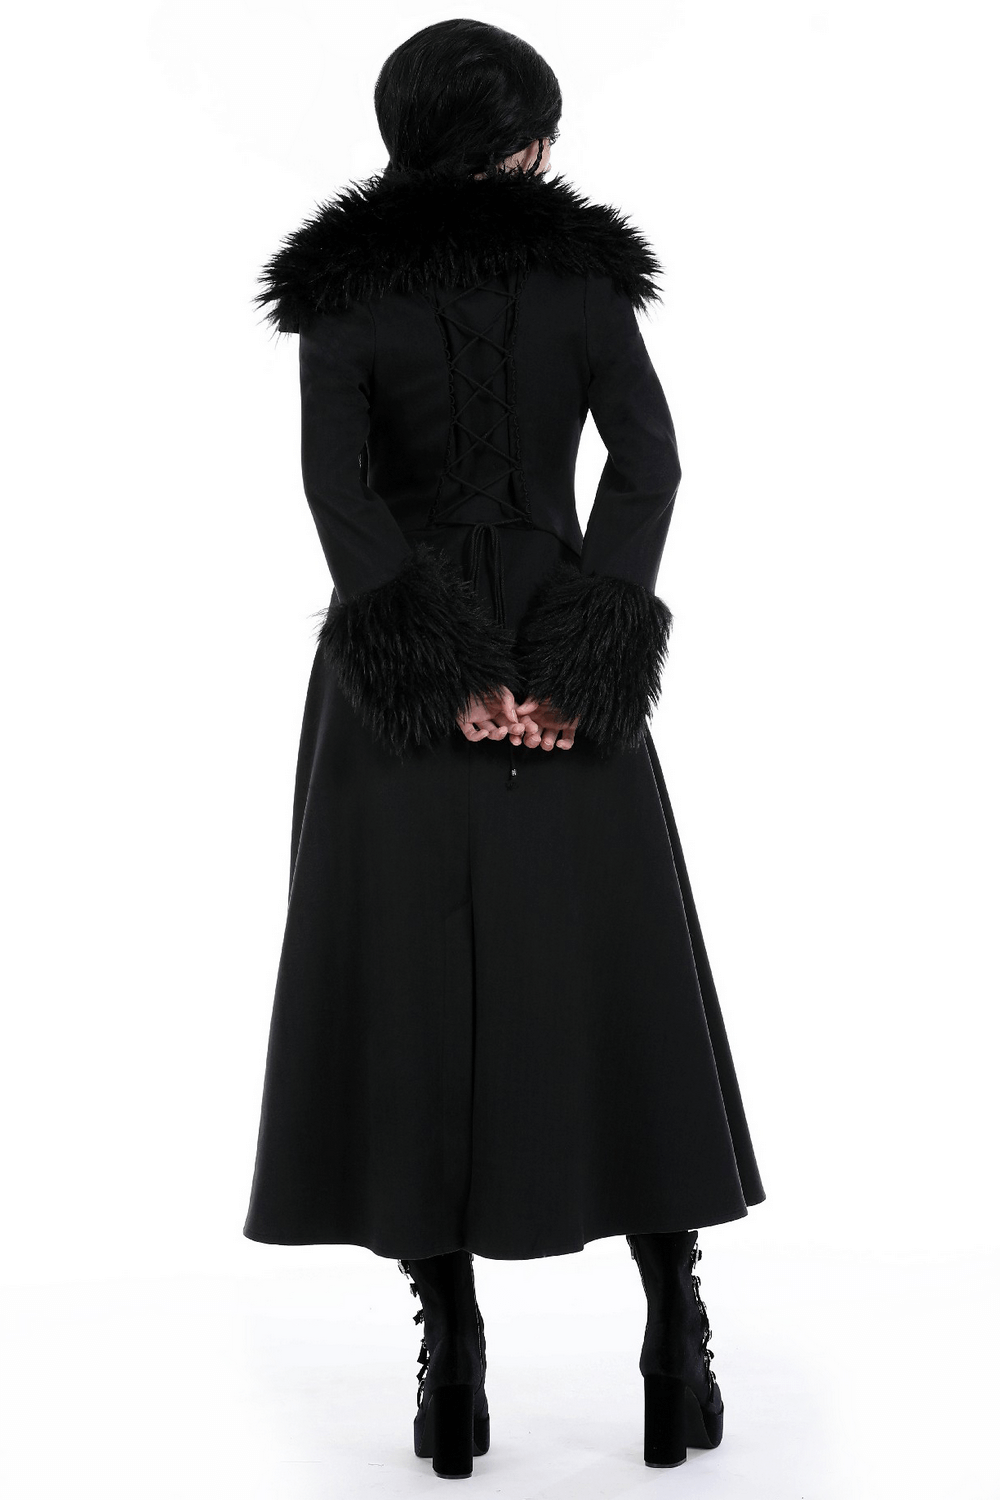 Women's Long Trench Coat with Faux Fur Collar and Cuffs